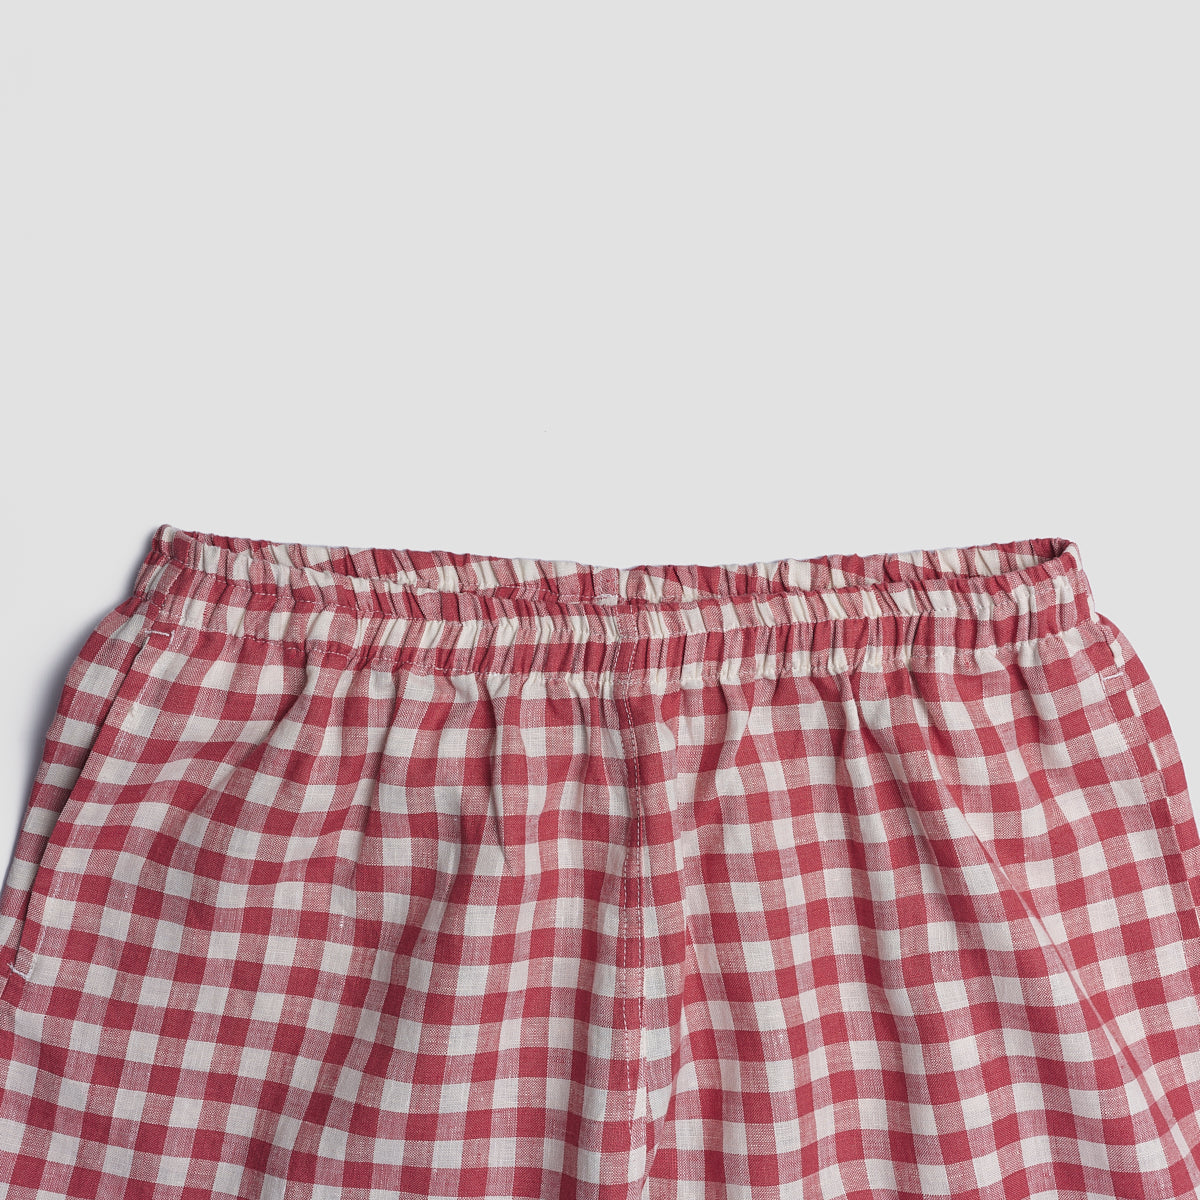 Men's Mineral Red Gingham Pajama Pants Elasticated Waistband